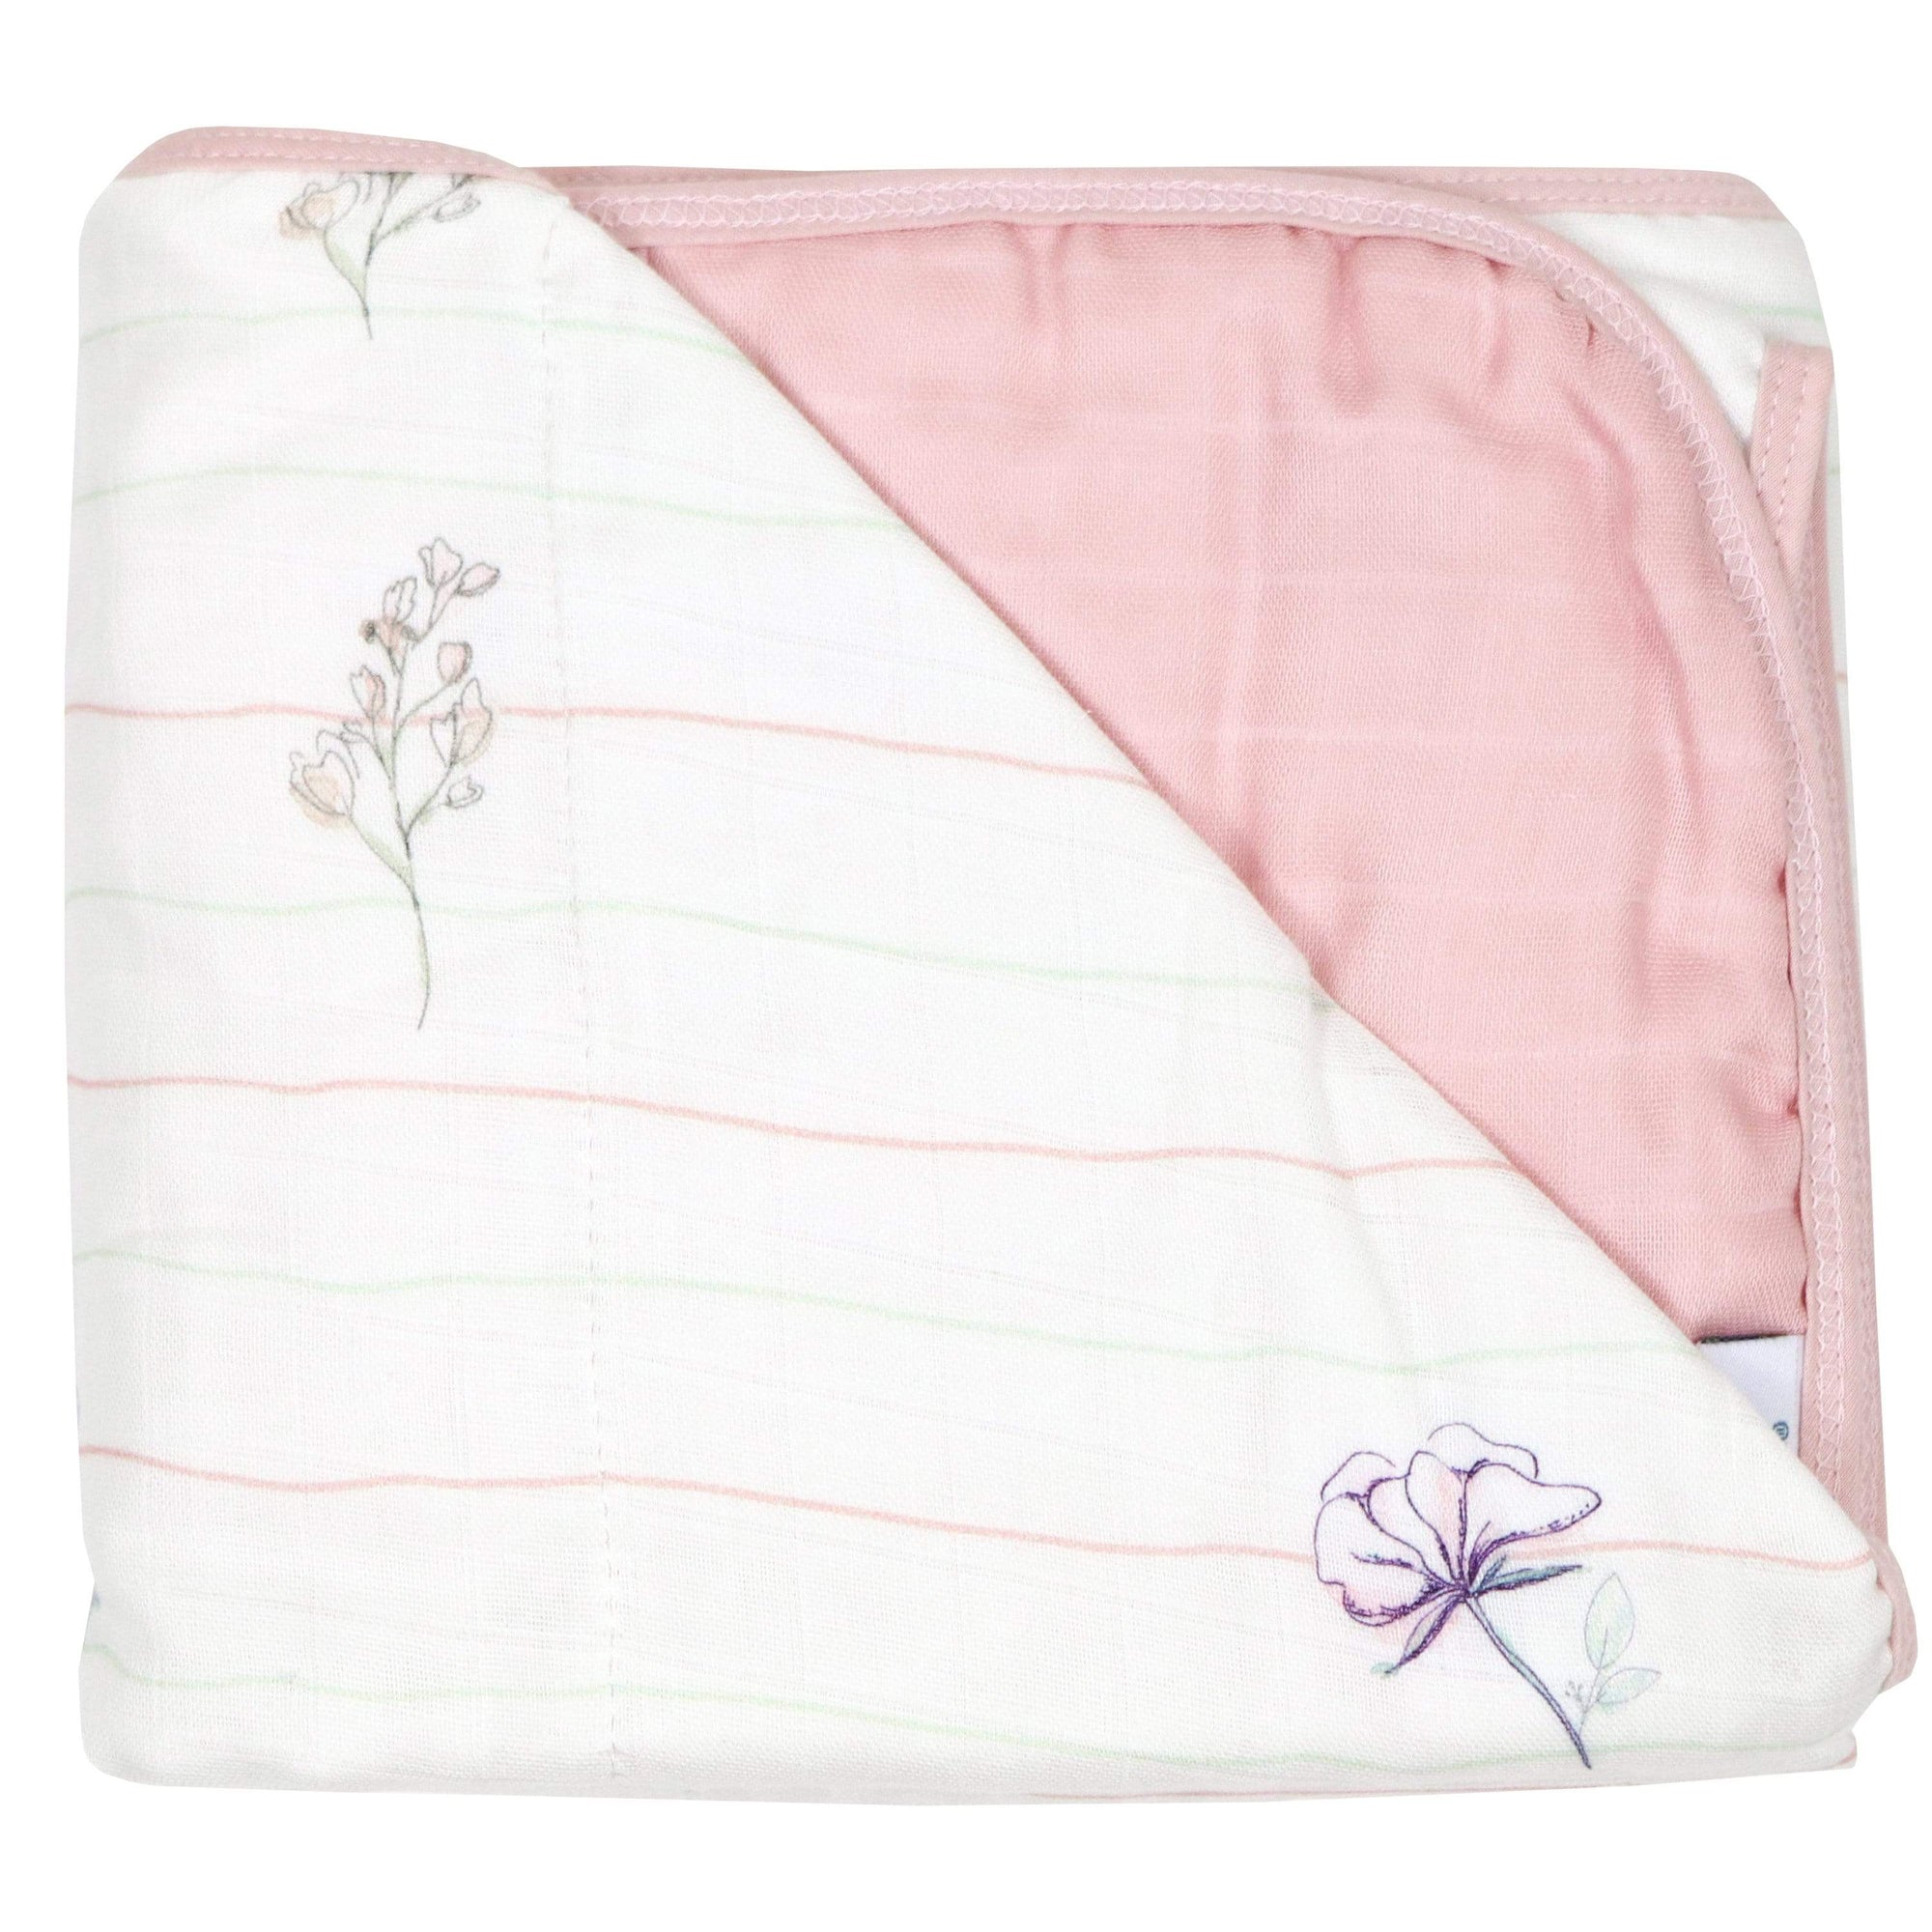 GooseWaddle Blanket Bamboo Muslin Quilted Blanket (Pink & Flowers)